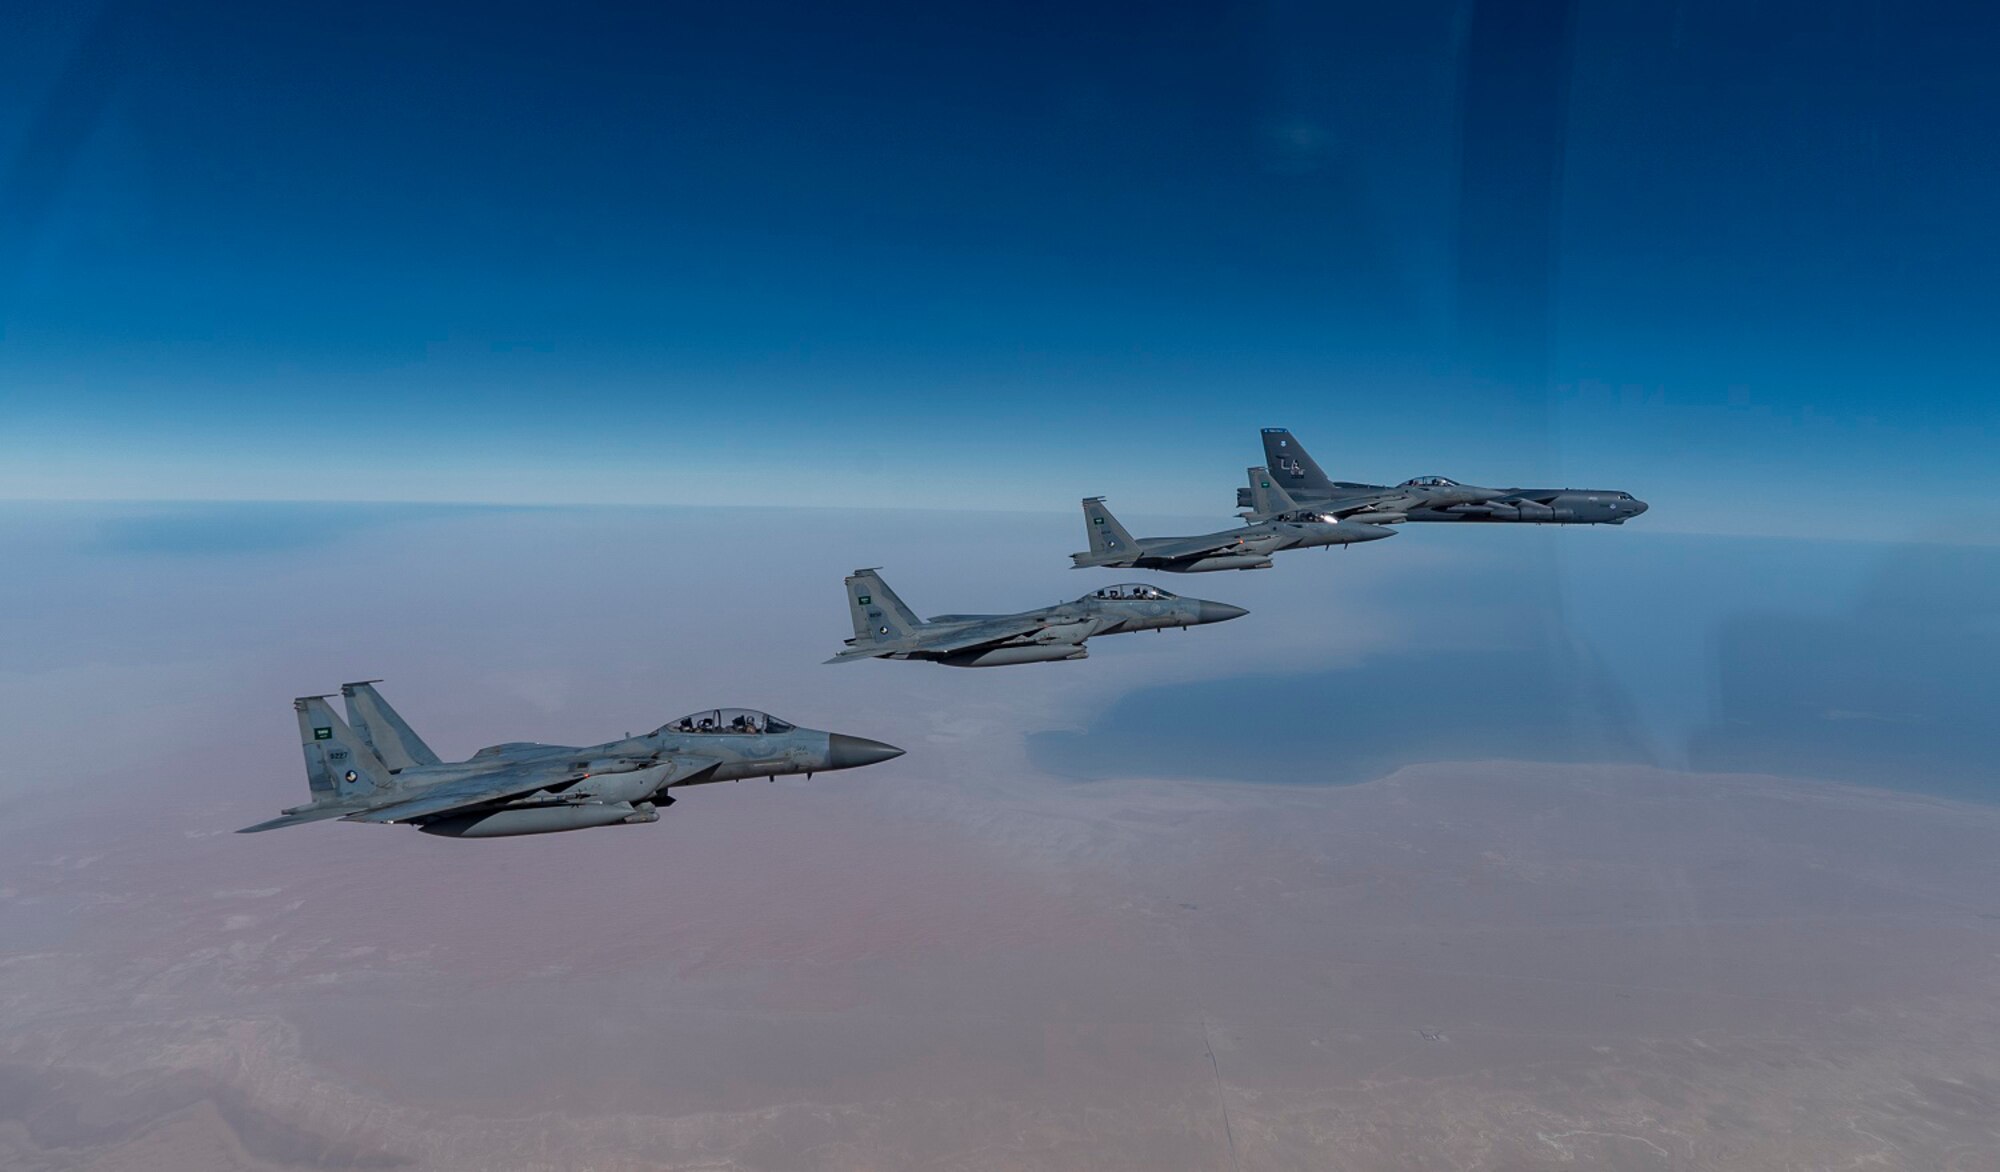 A U.S. Air Force B-52 Stratofortress  from the 2nd Bomb Wing, Barksdale Air Force Base, LA, flew with Royal Saudi Arabian Air Force F-15SAs during a bomber task force mission over the U.S. Central Command area of responsibility, Jan. 27, 2021. The bomber deployment underscores the U.S. Military's commitment to regional security and demonstrates a unique ability to rapidly deploy on short notice. The B-52 is a long-range, heavy bomber that is capable of flying at high subsonic speeds of altitudes of up to 50,000 feet and provides the United States with a global strike capability.